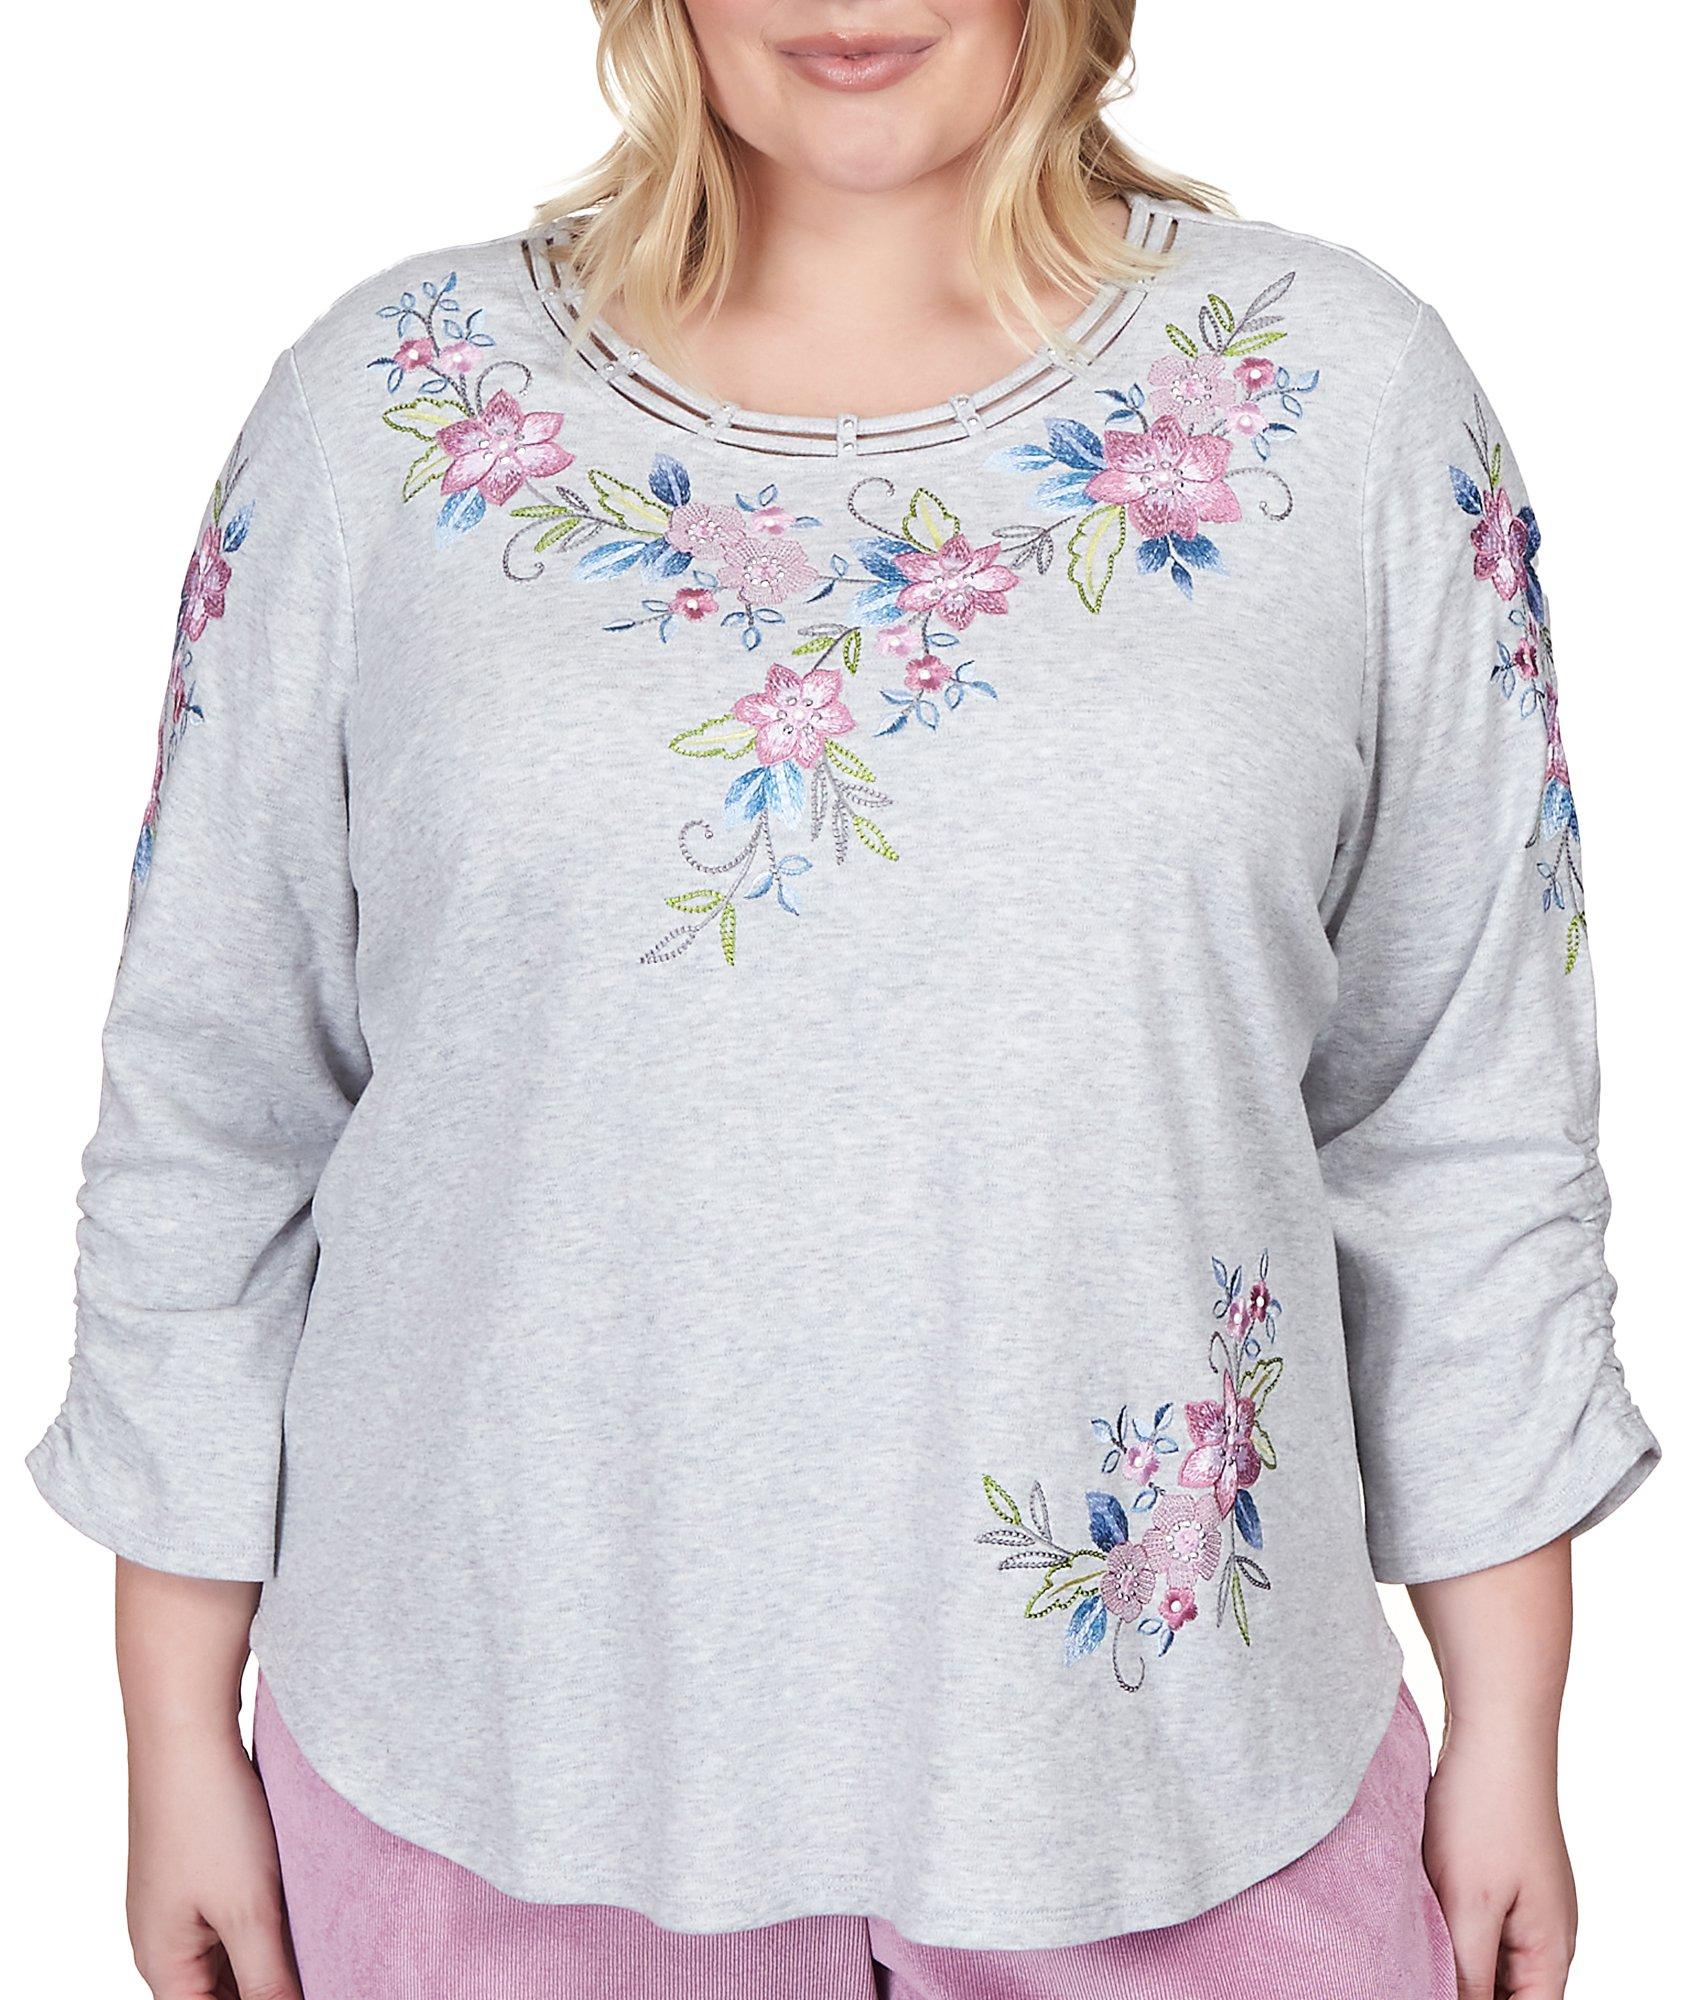 Plus Floral Embroidery 3/4 Sleeve Top